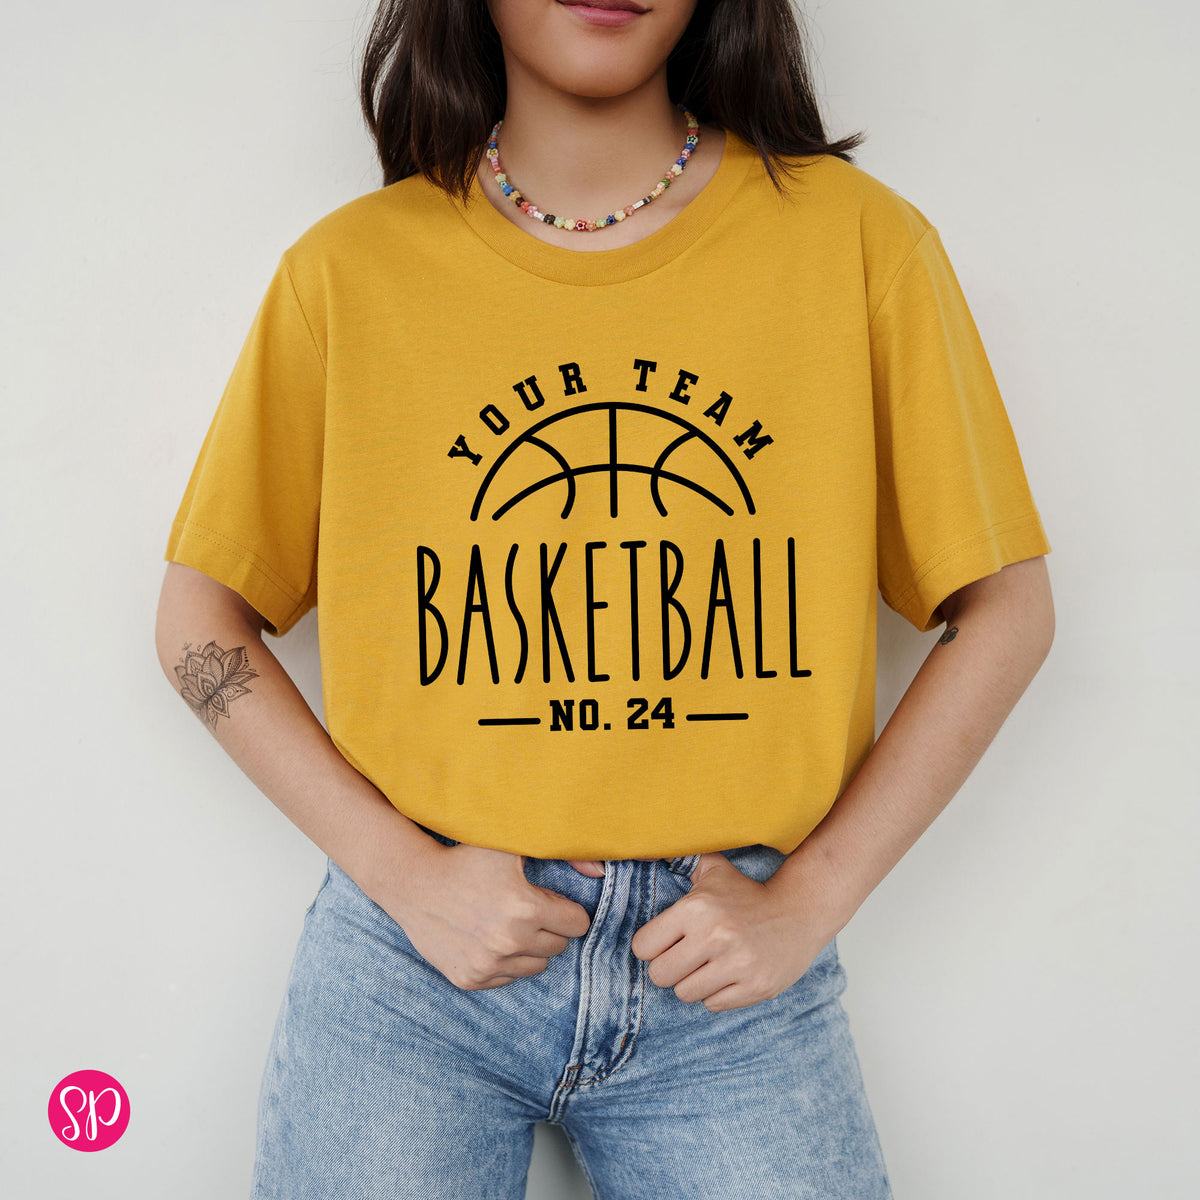 Your Team Basketball with Custom Number (Skinny Text) Unisex T-Shirt